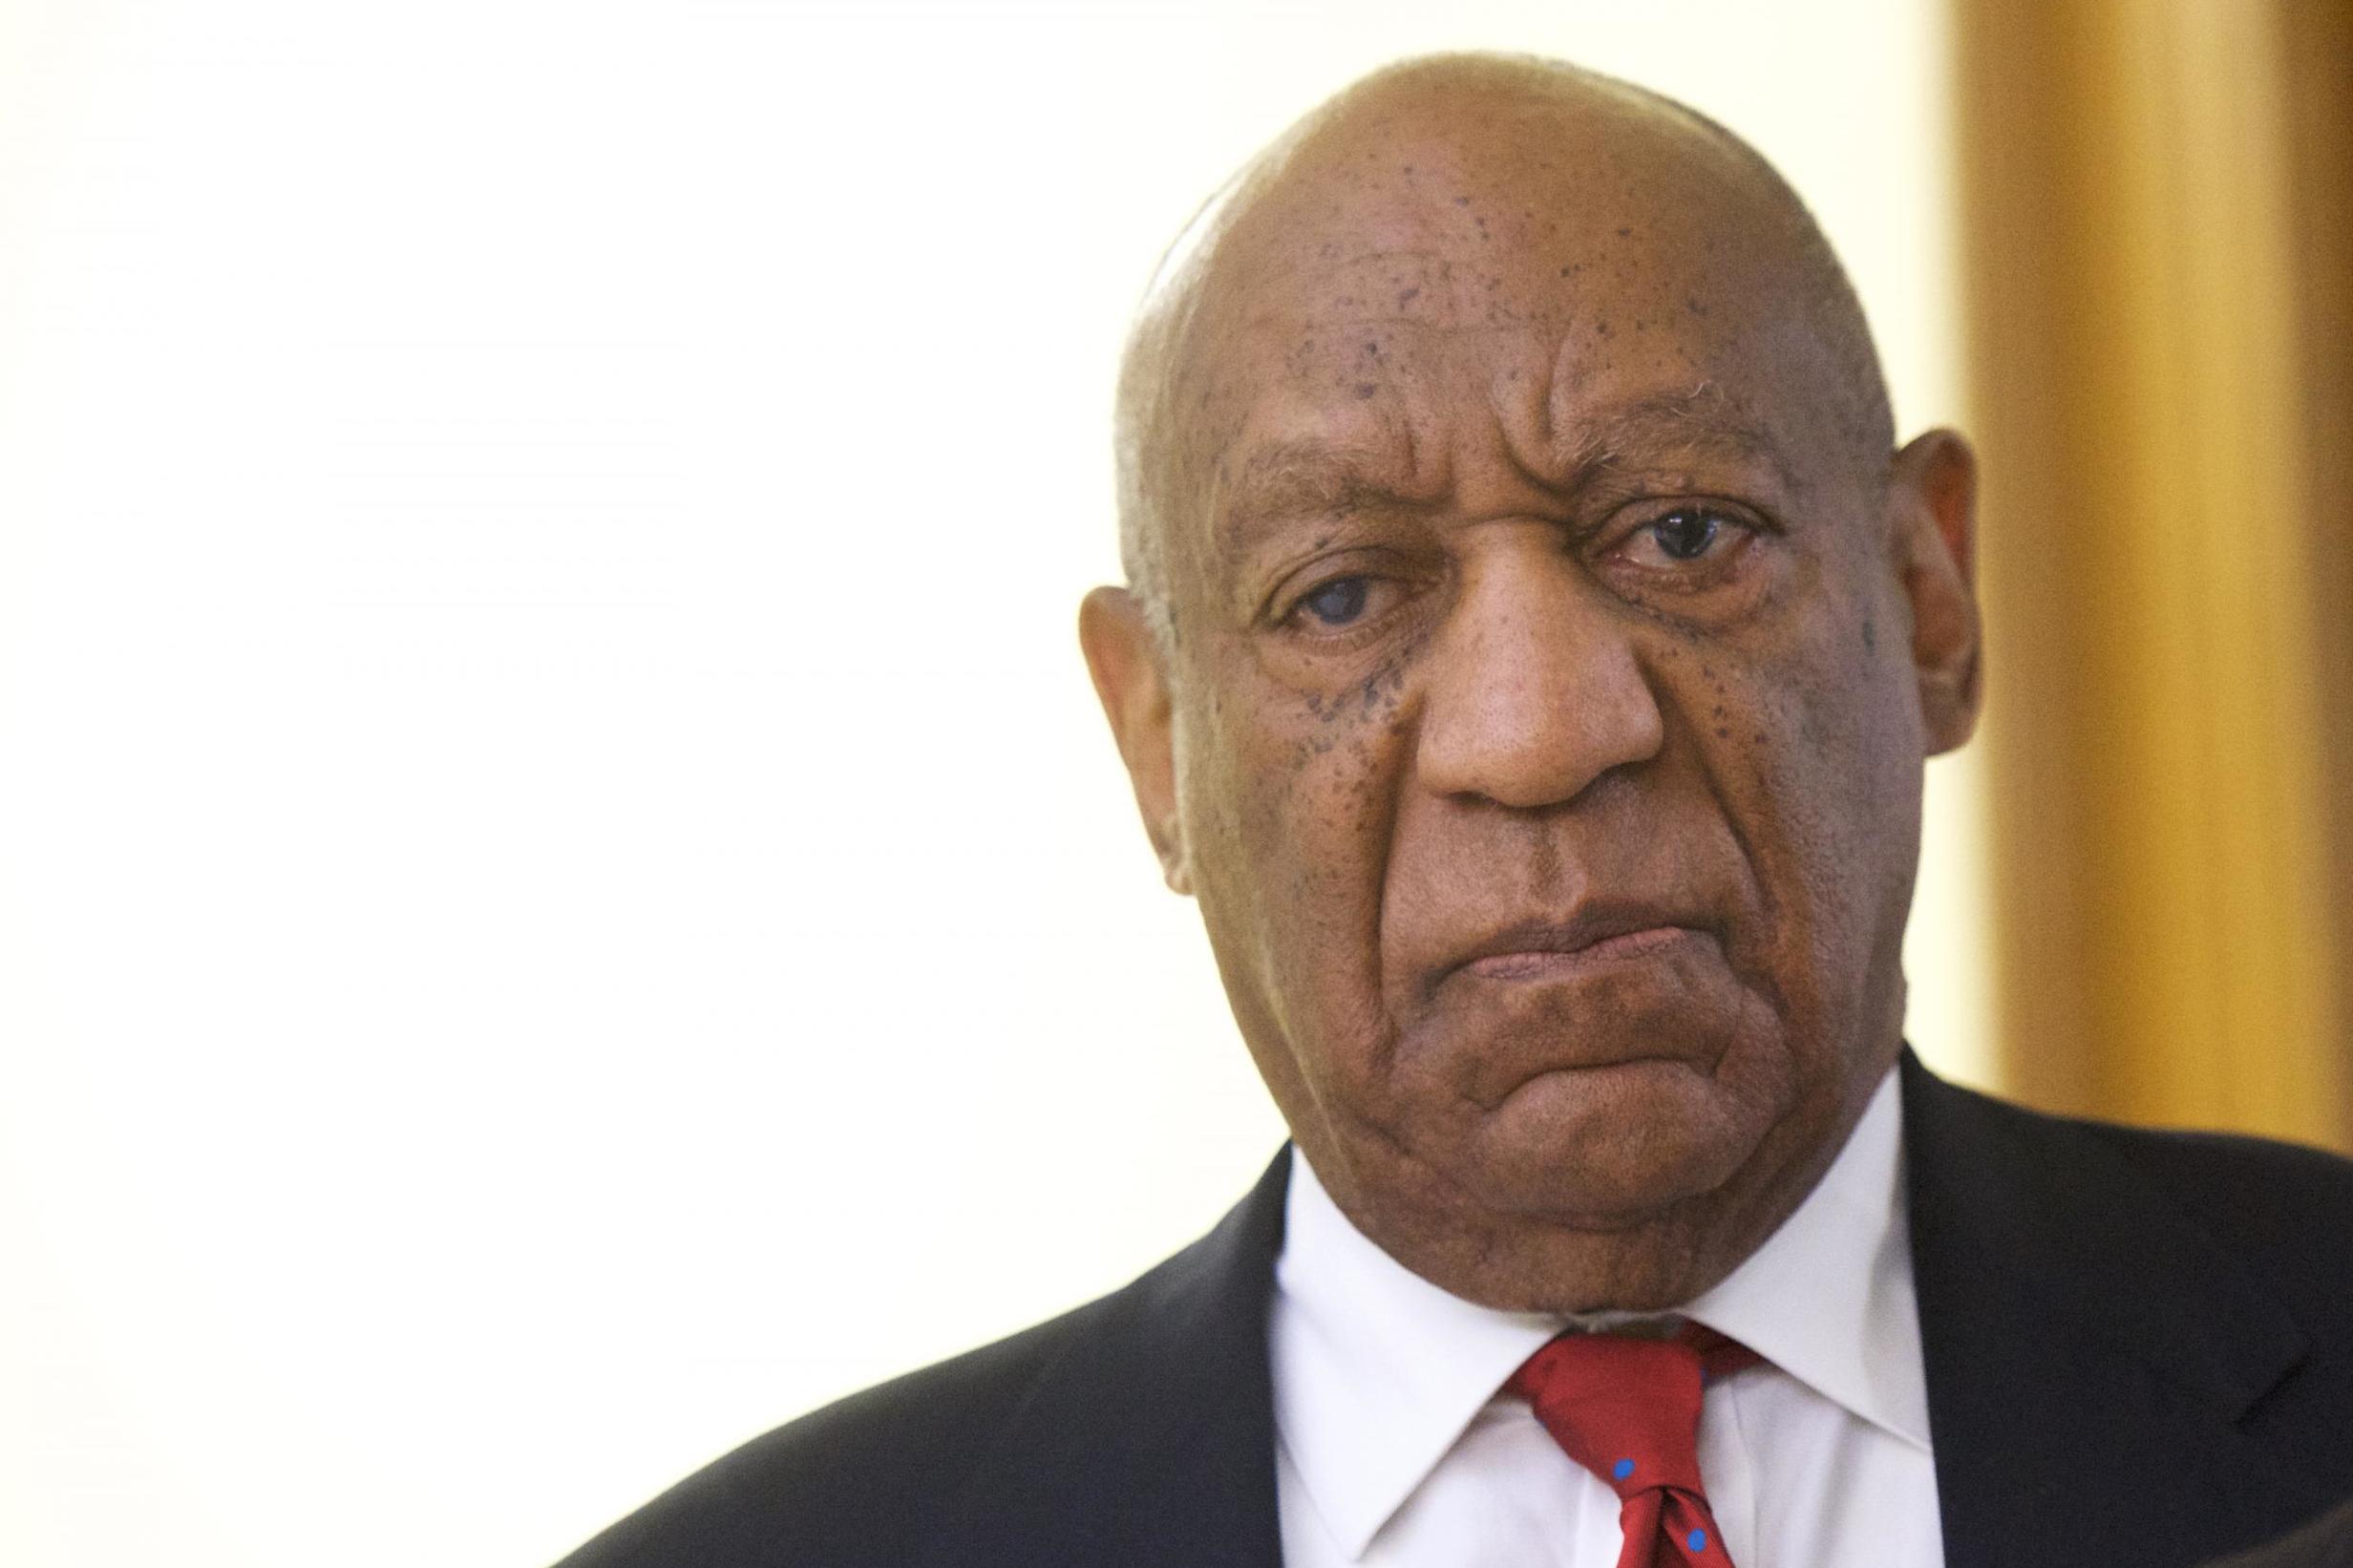 Bill Cosby during his sexual assault retrial on 26 April 2018 in Norristown, Pennsylvania.